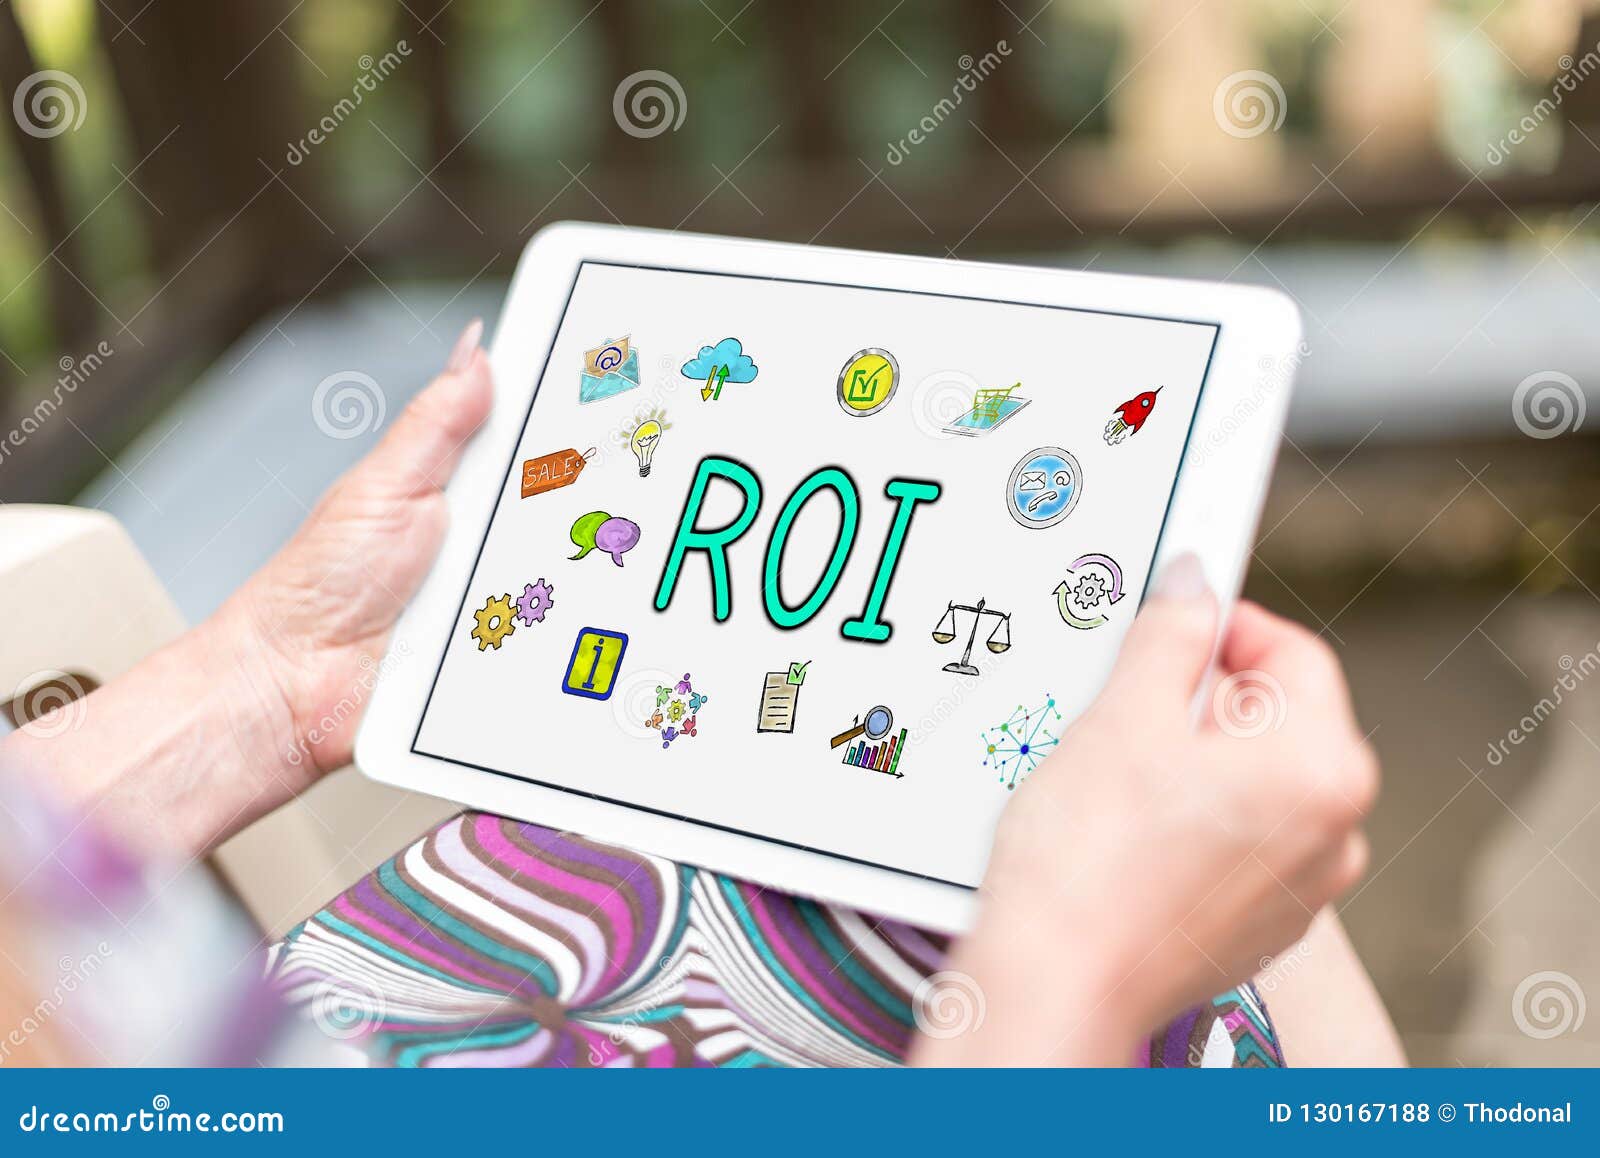 roi concept on a tablet